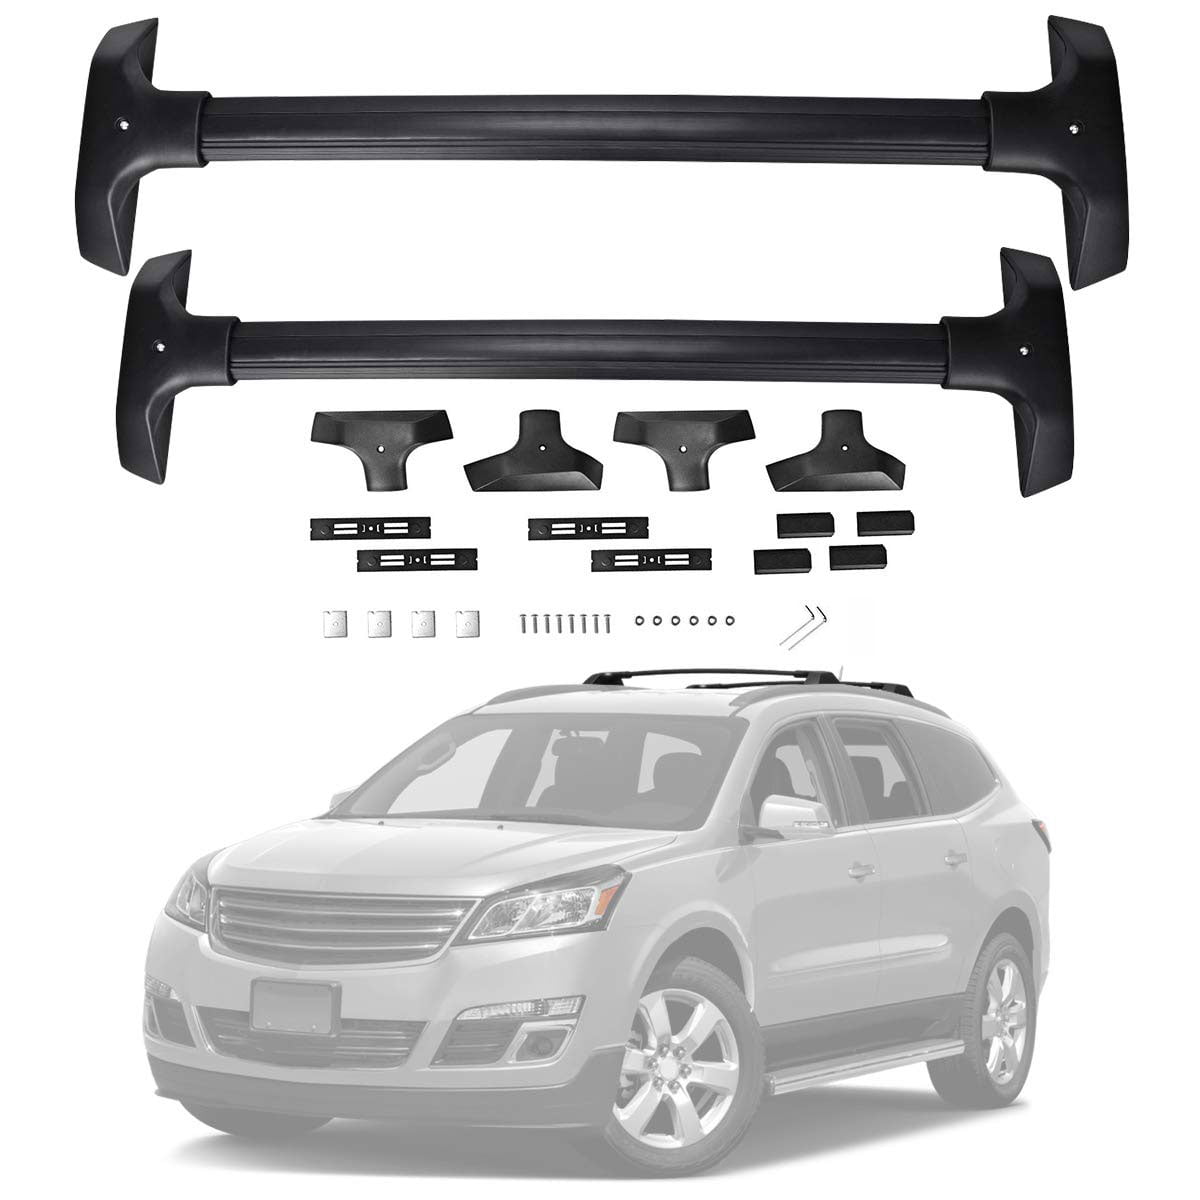 Roof Cross Bars for 2009-2017 Chevrolet Traverse, Not Included C Channel - Walmart.com - Walmart.com 2017 Chevy Traverse Roof Rack C Channel